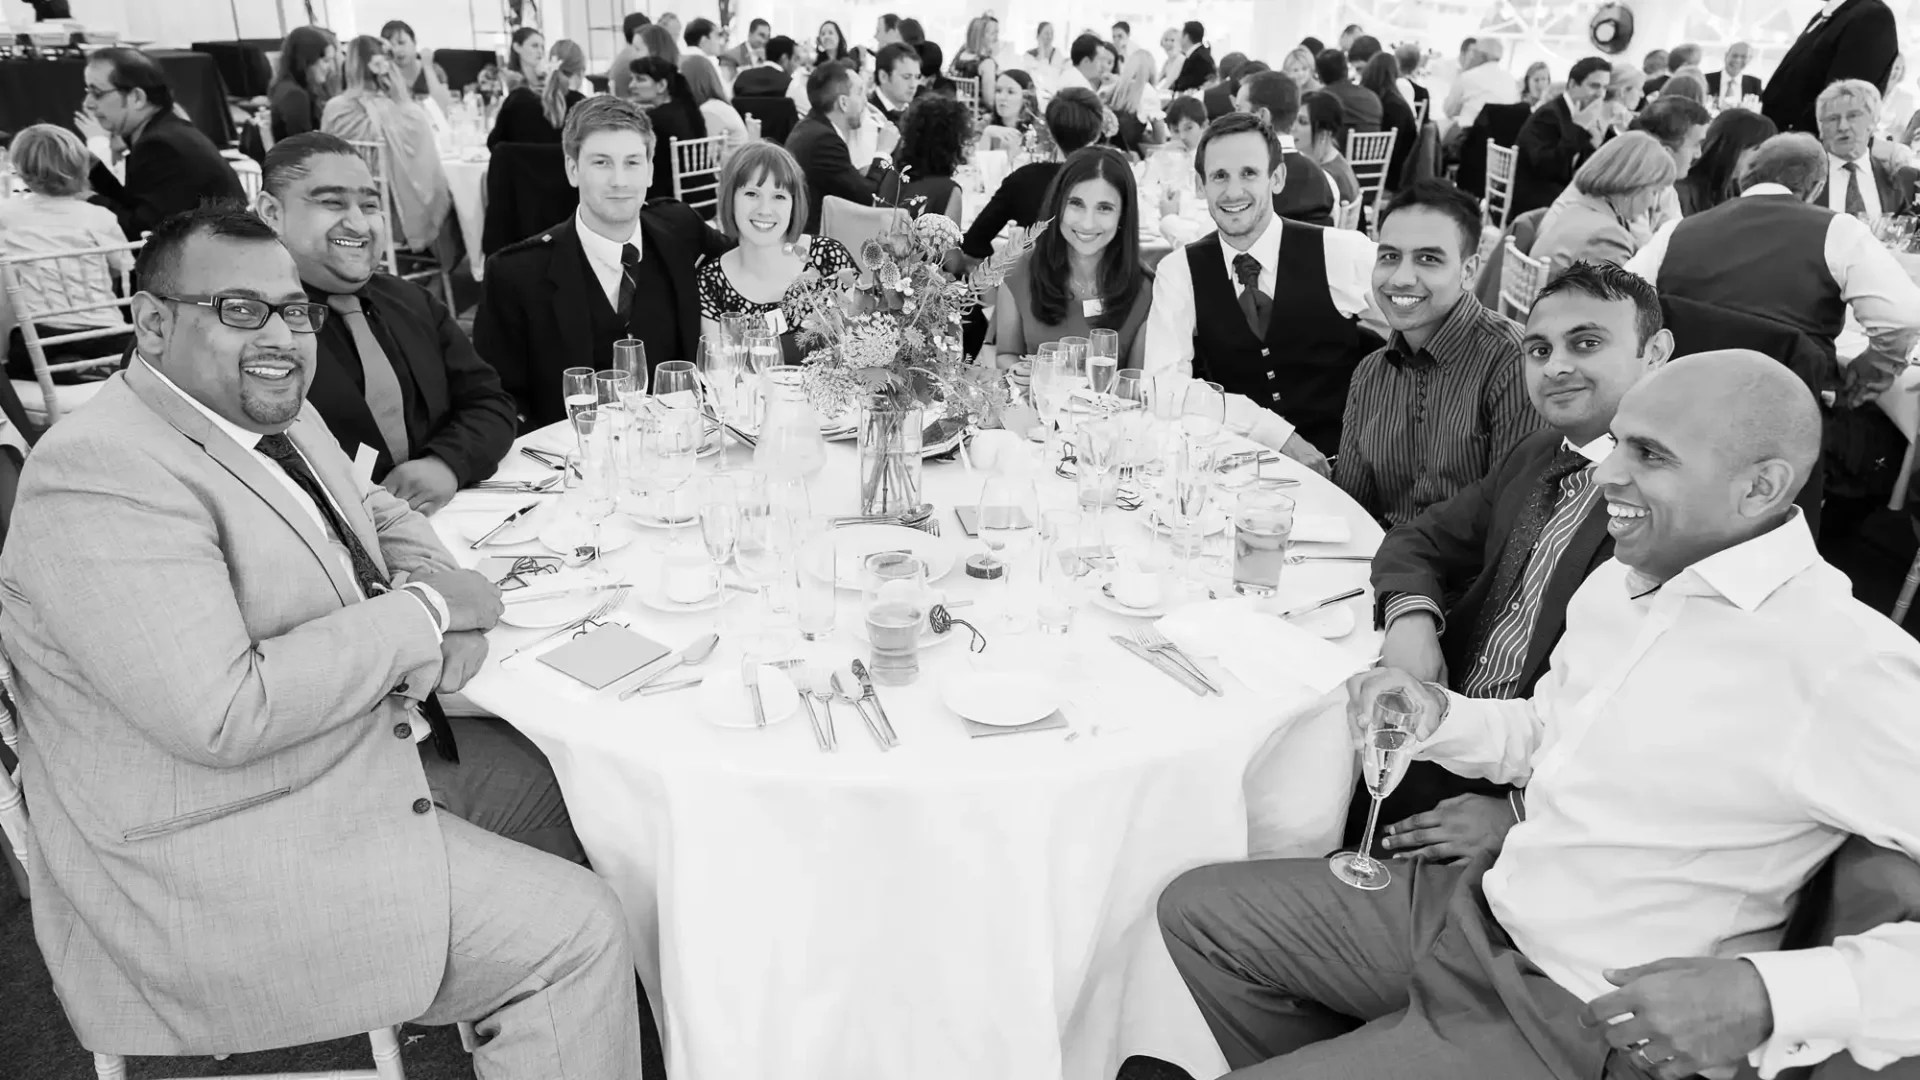 A group of people smiling at a table during a formal event in a tent, dressed in business attire. black and white photograph.